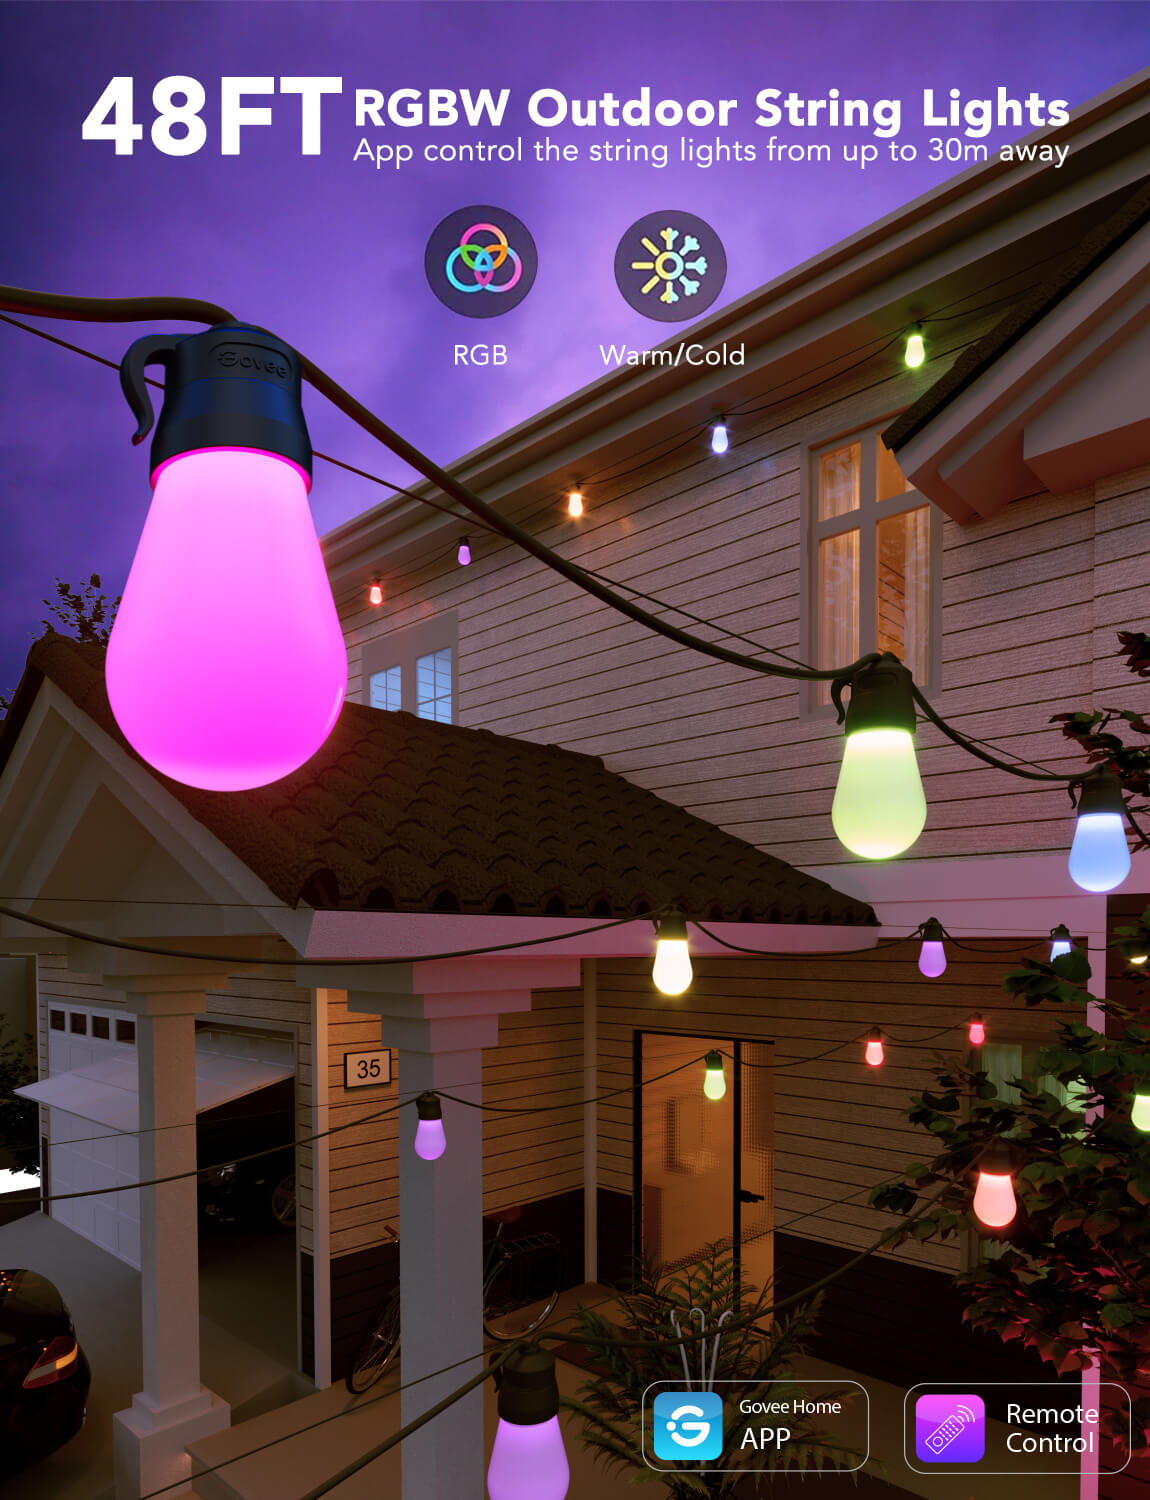 Govee Lynx Dream Bluetooth & Wi-Fi Outdoor String Lights Review